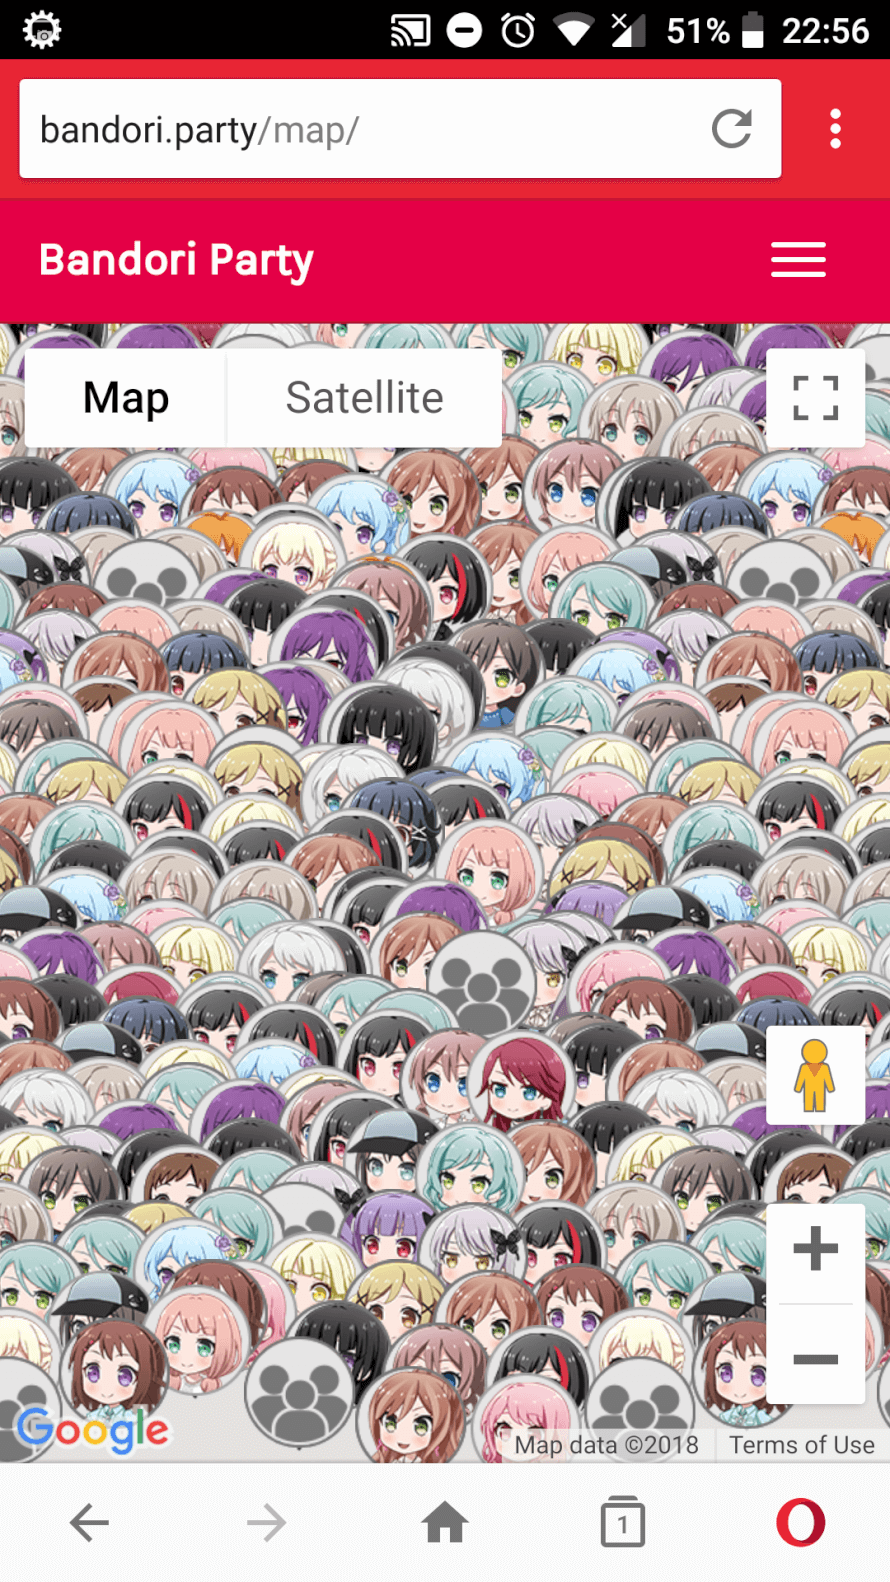 I though my phone will explode just looking at the map. 